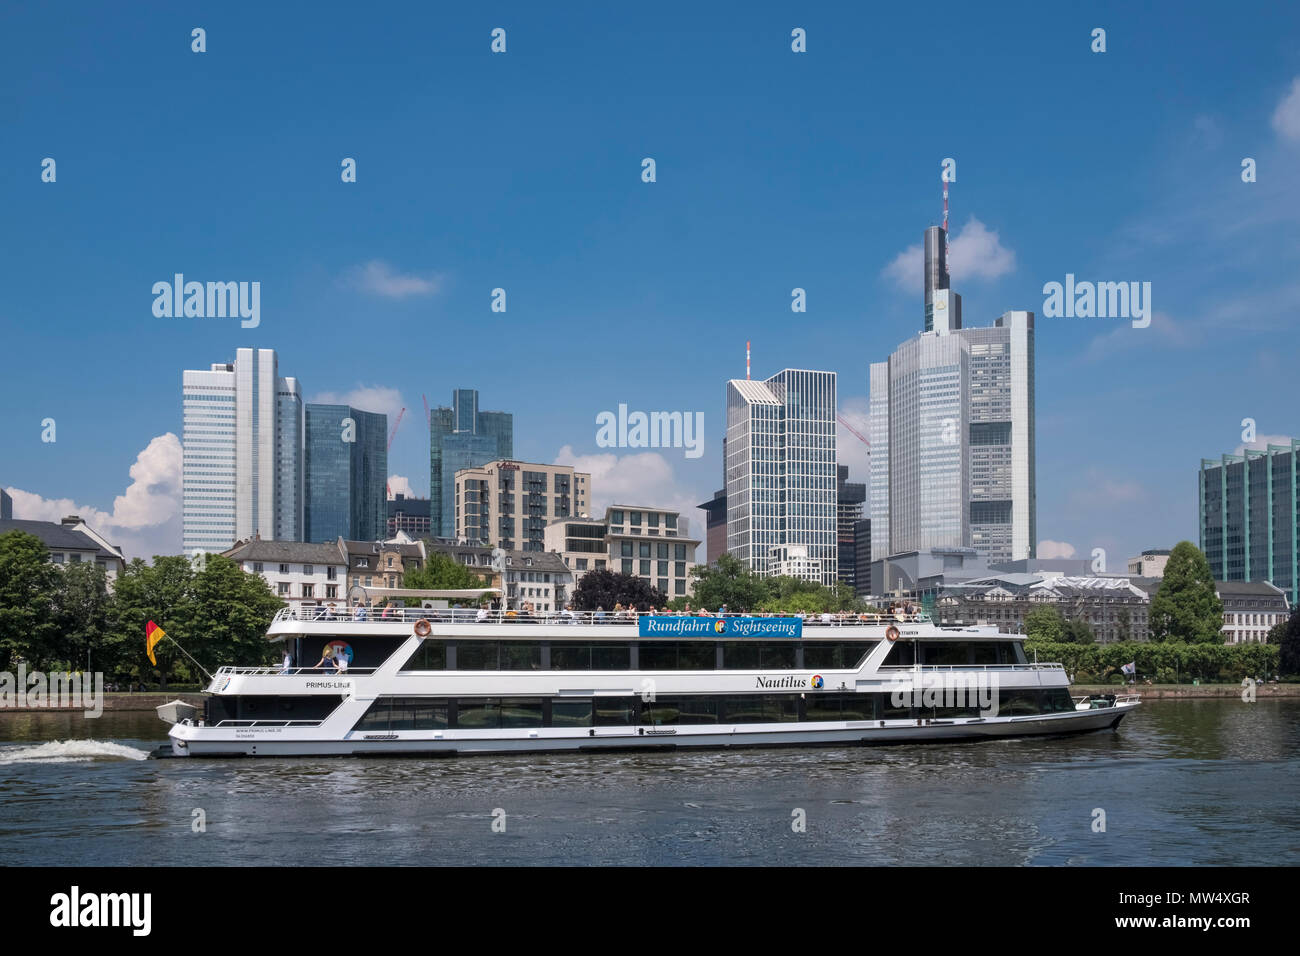 An opentop rivercruise boat takes tourists along the river Main to enjoy the City of Frankfurt am Main modern architecture skyline, Germany. Stock Photo